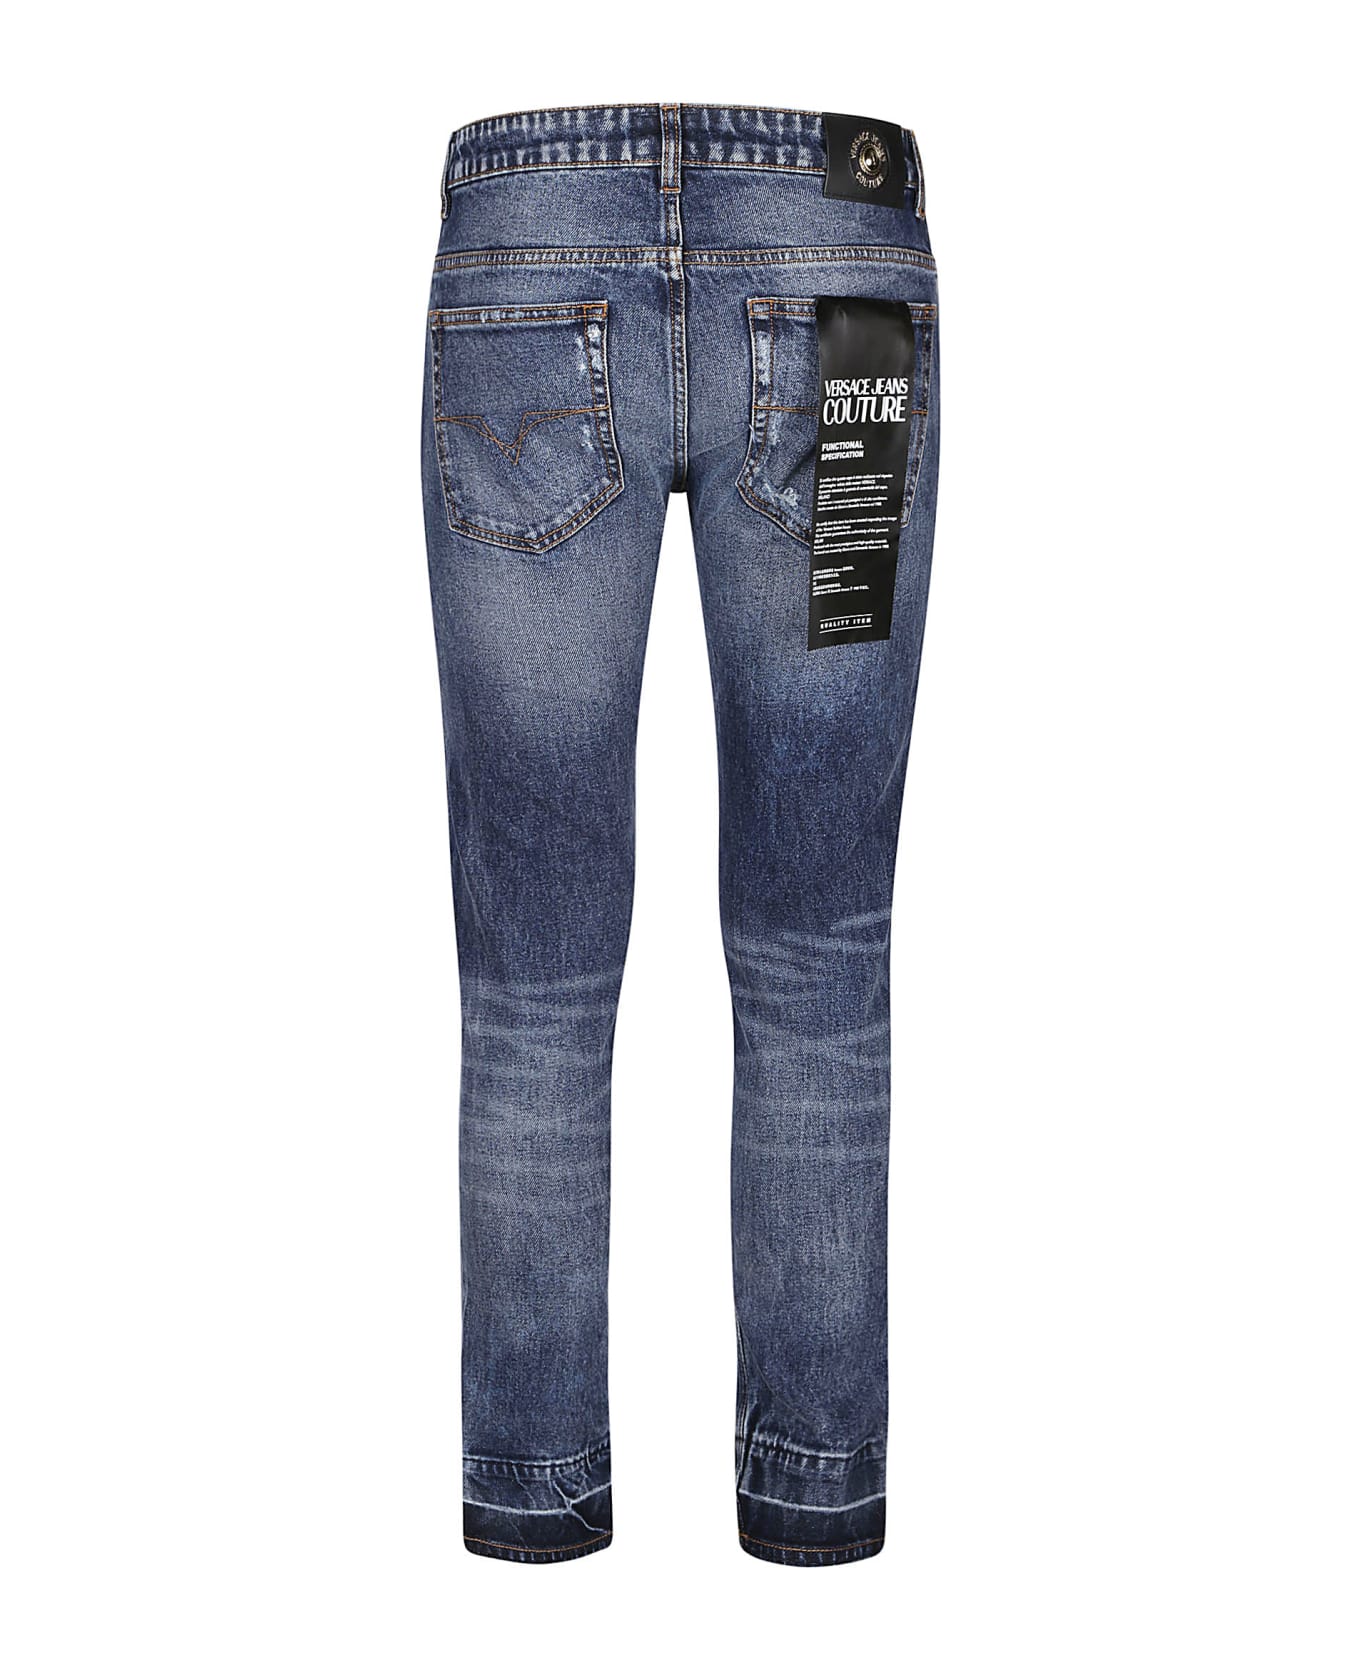 Versace Jeans Couture Rip Effect 5 Pockets Jeans - Indigo デニム